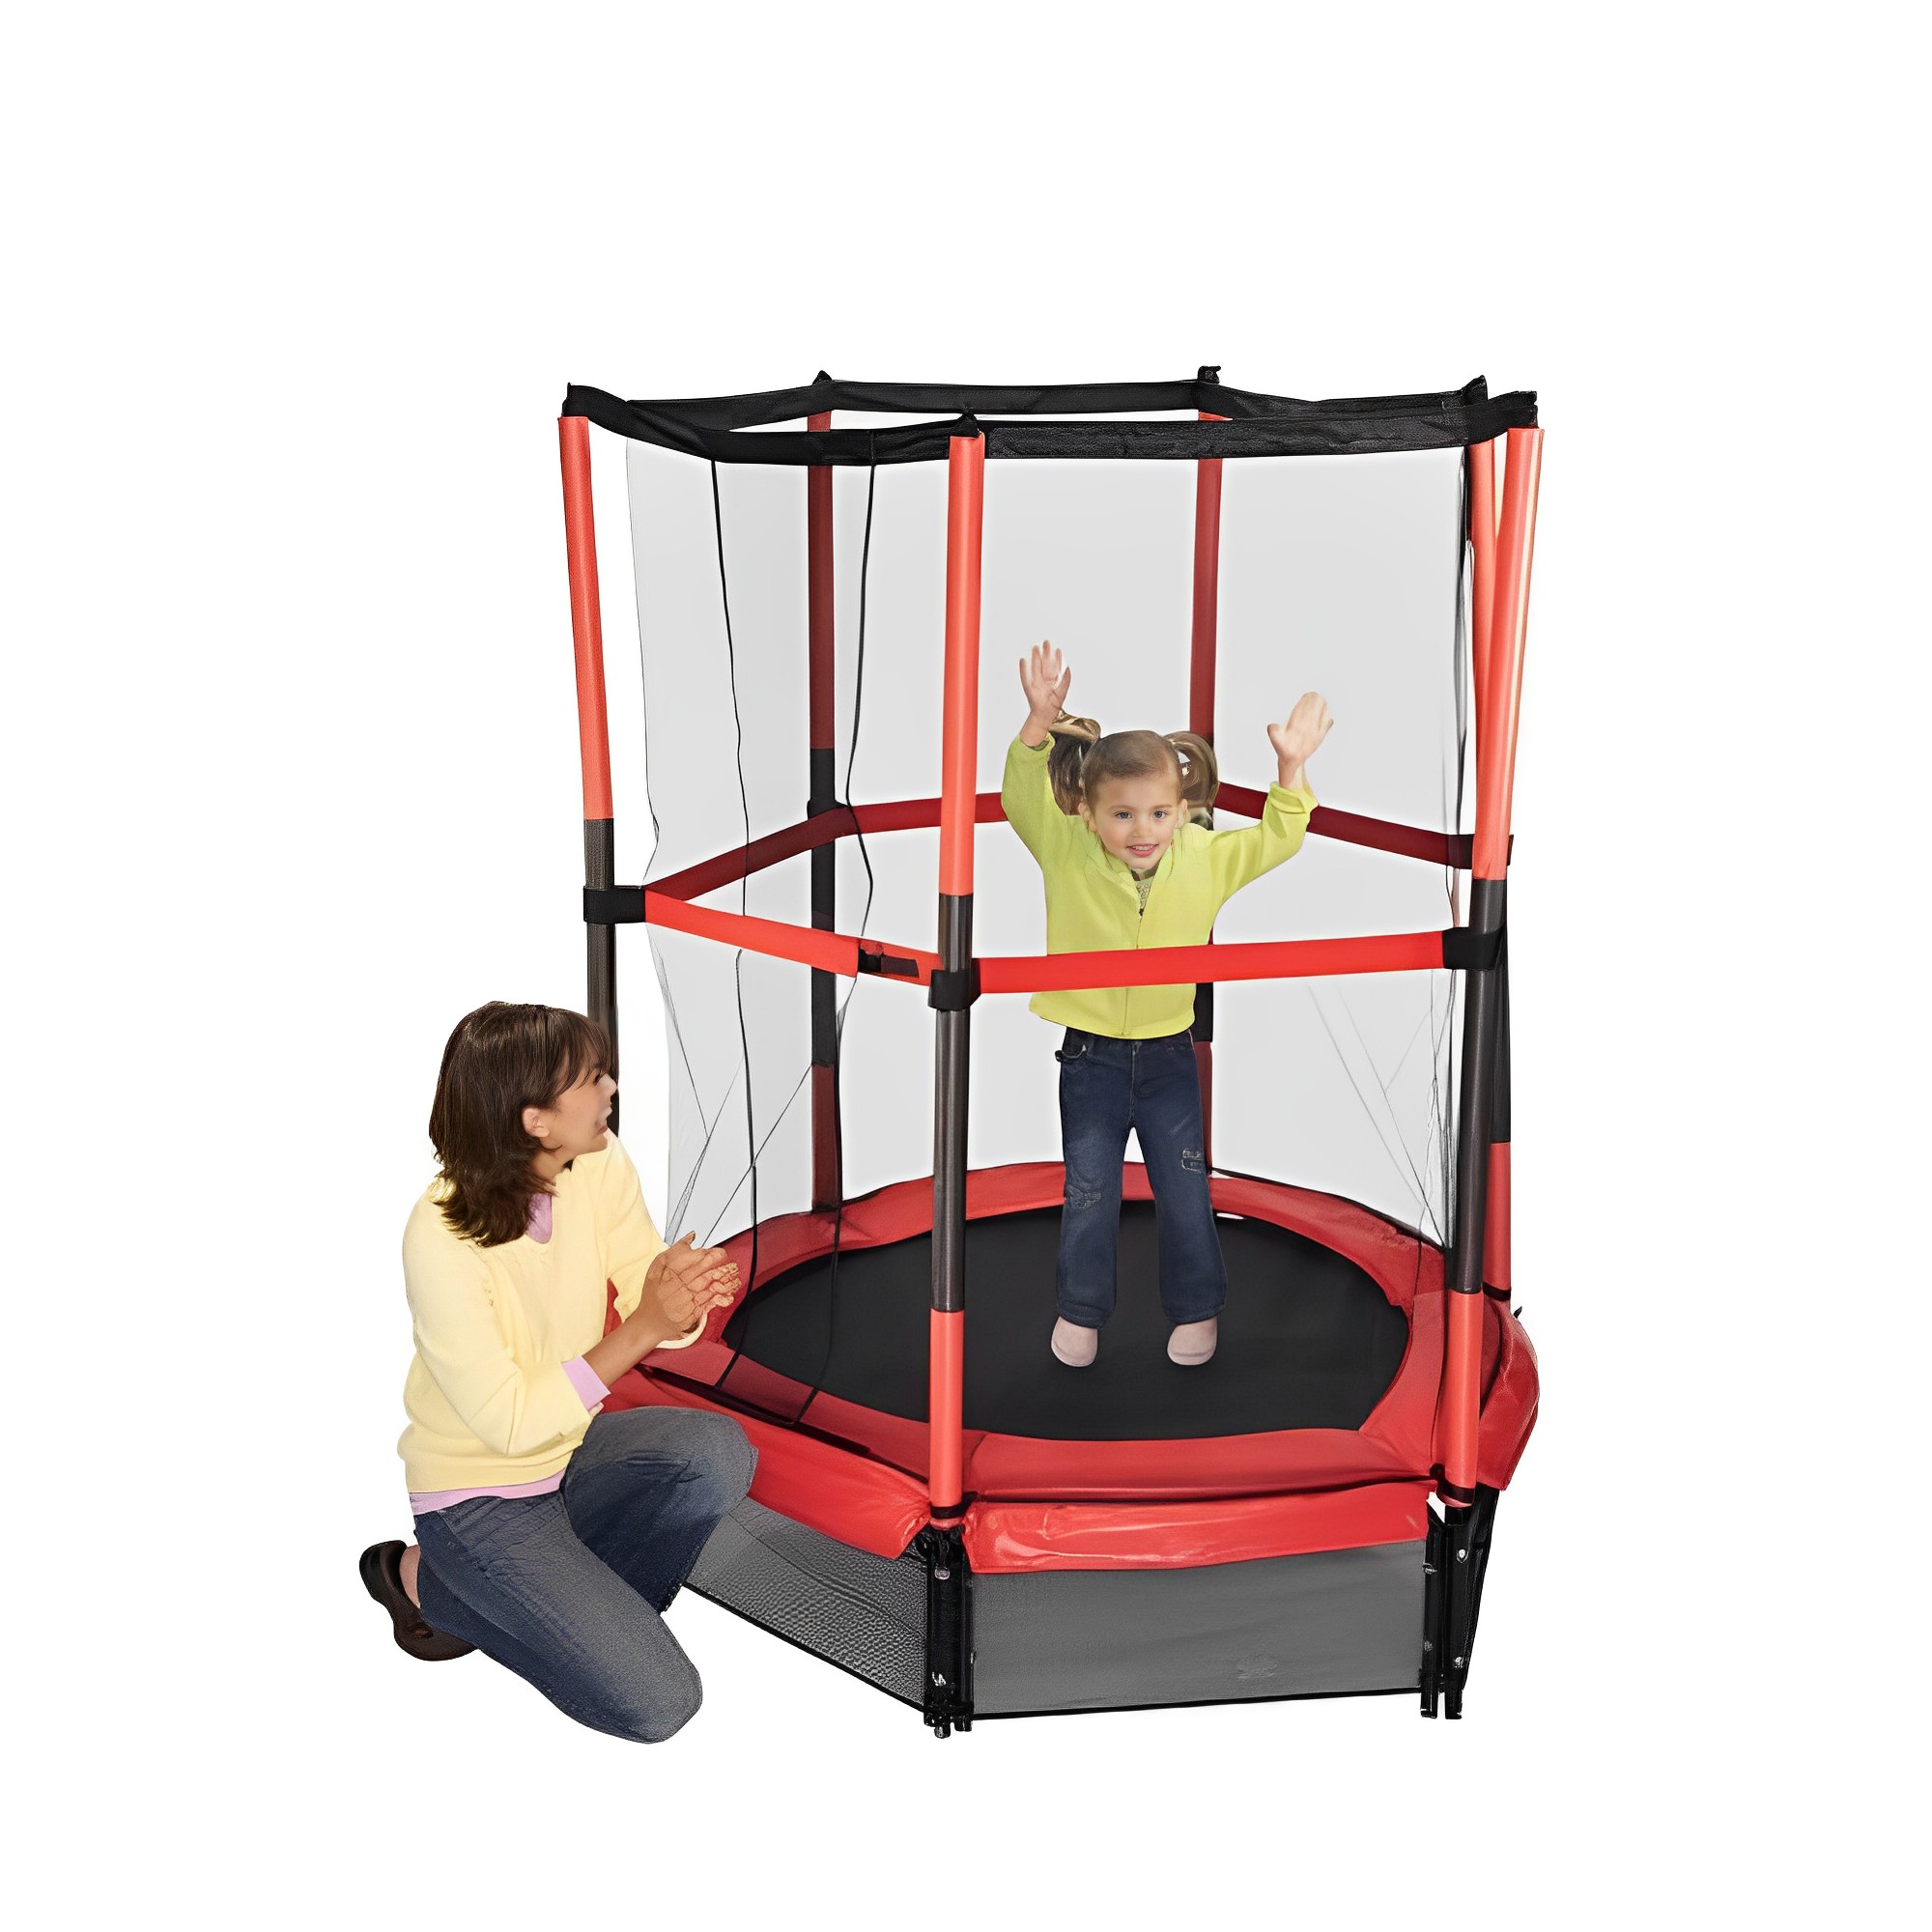 Myts 4 Feet Round Trampoline For